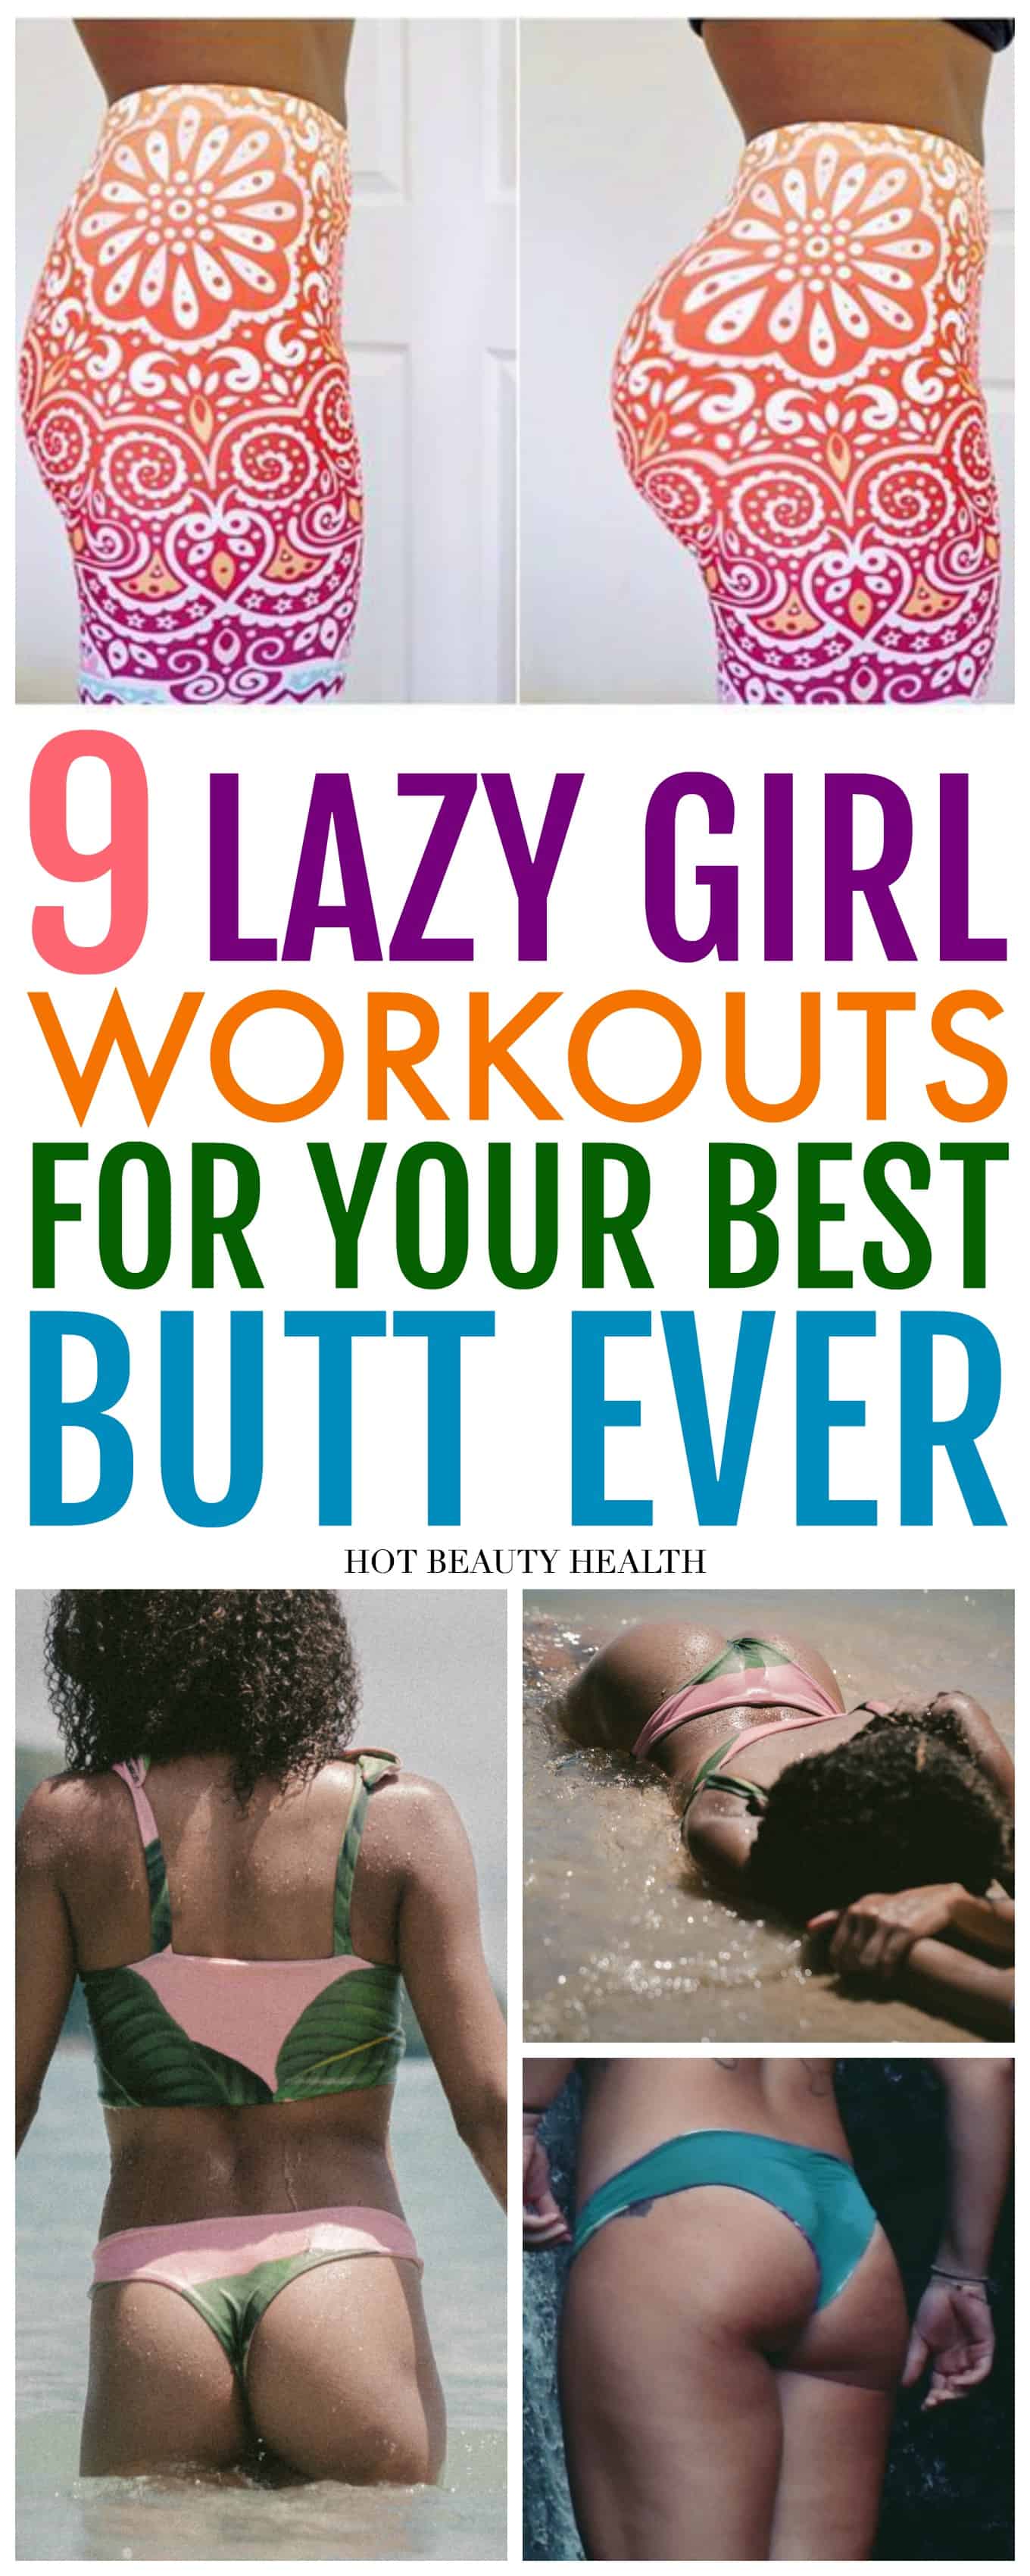 9 Lazy Girl Butt Shaping Exercises You Need to Try - Hot Beauty Health